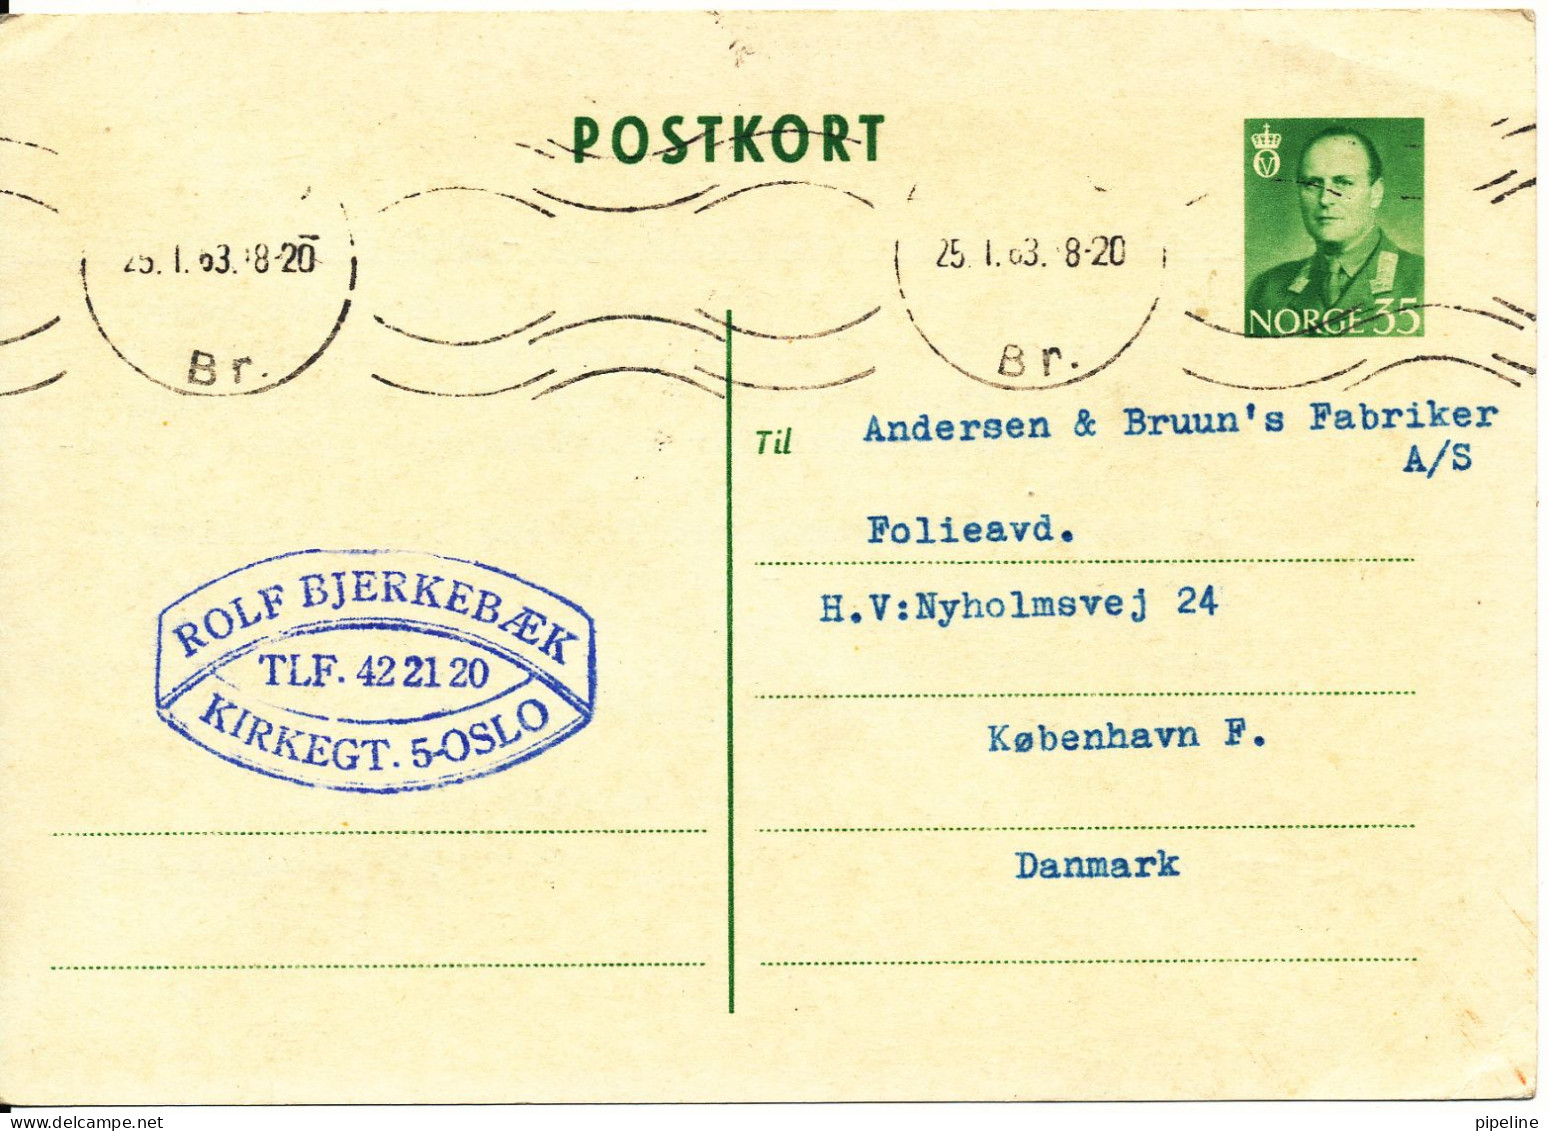 Norway Postcard Postal Stationery Sent To Denmark 25-1-1963 - Covers & Documents